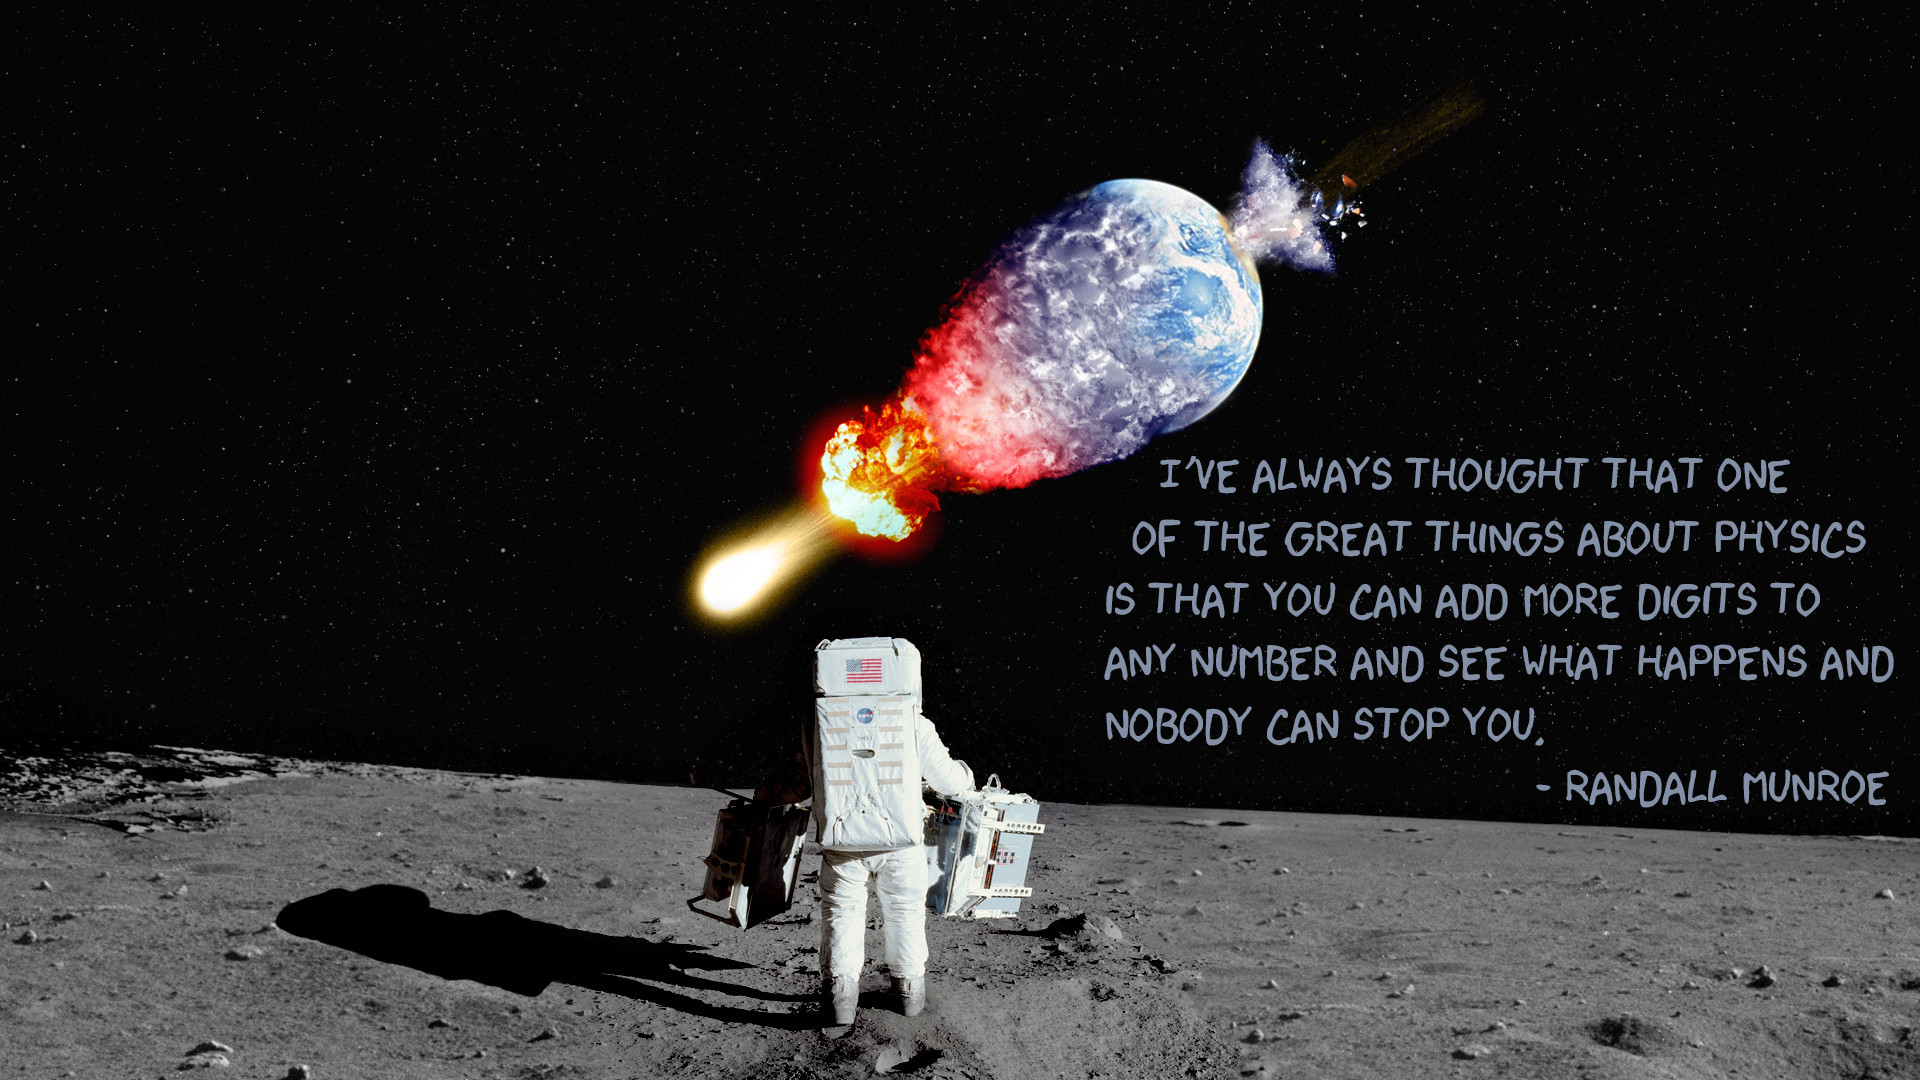 Earth Meteor Astronaut Randall Munroe Quote - Asteroid Going Through Planet , HD Wallpaper & Backgrounds